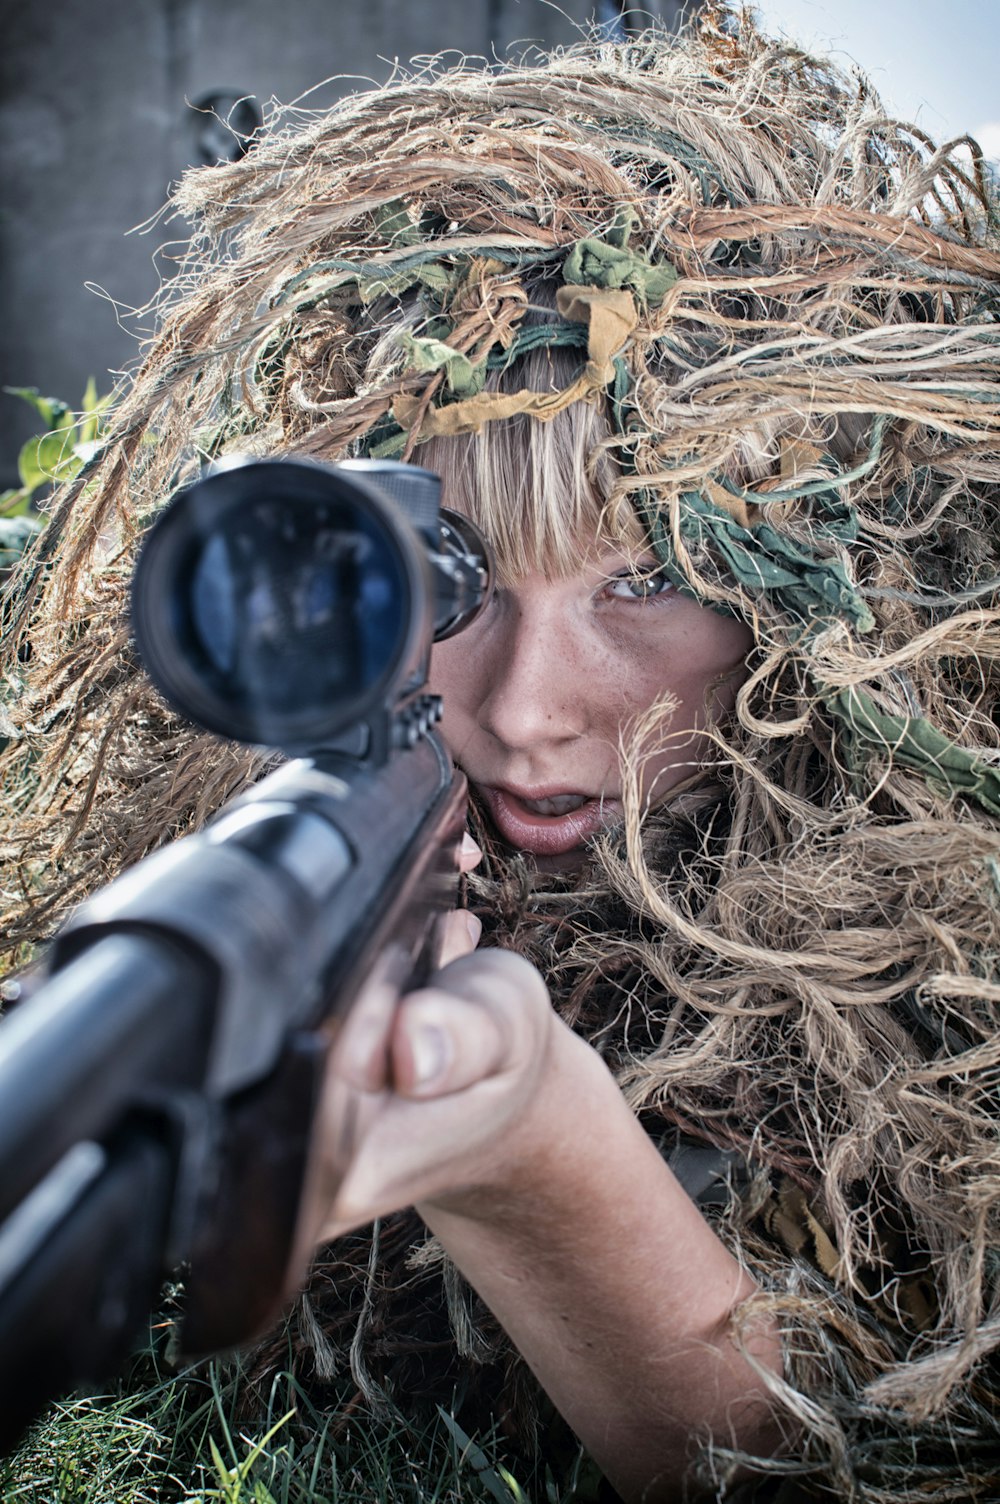 woman wearing gillie suit holding sniper rifle